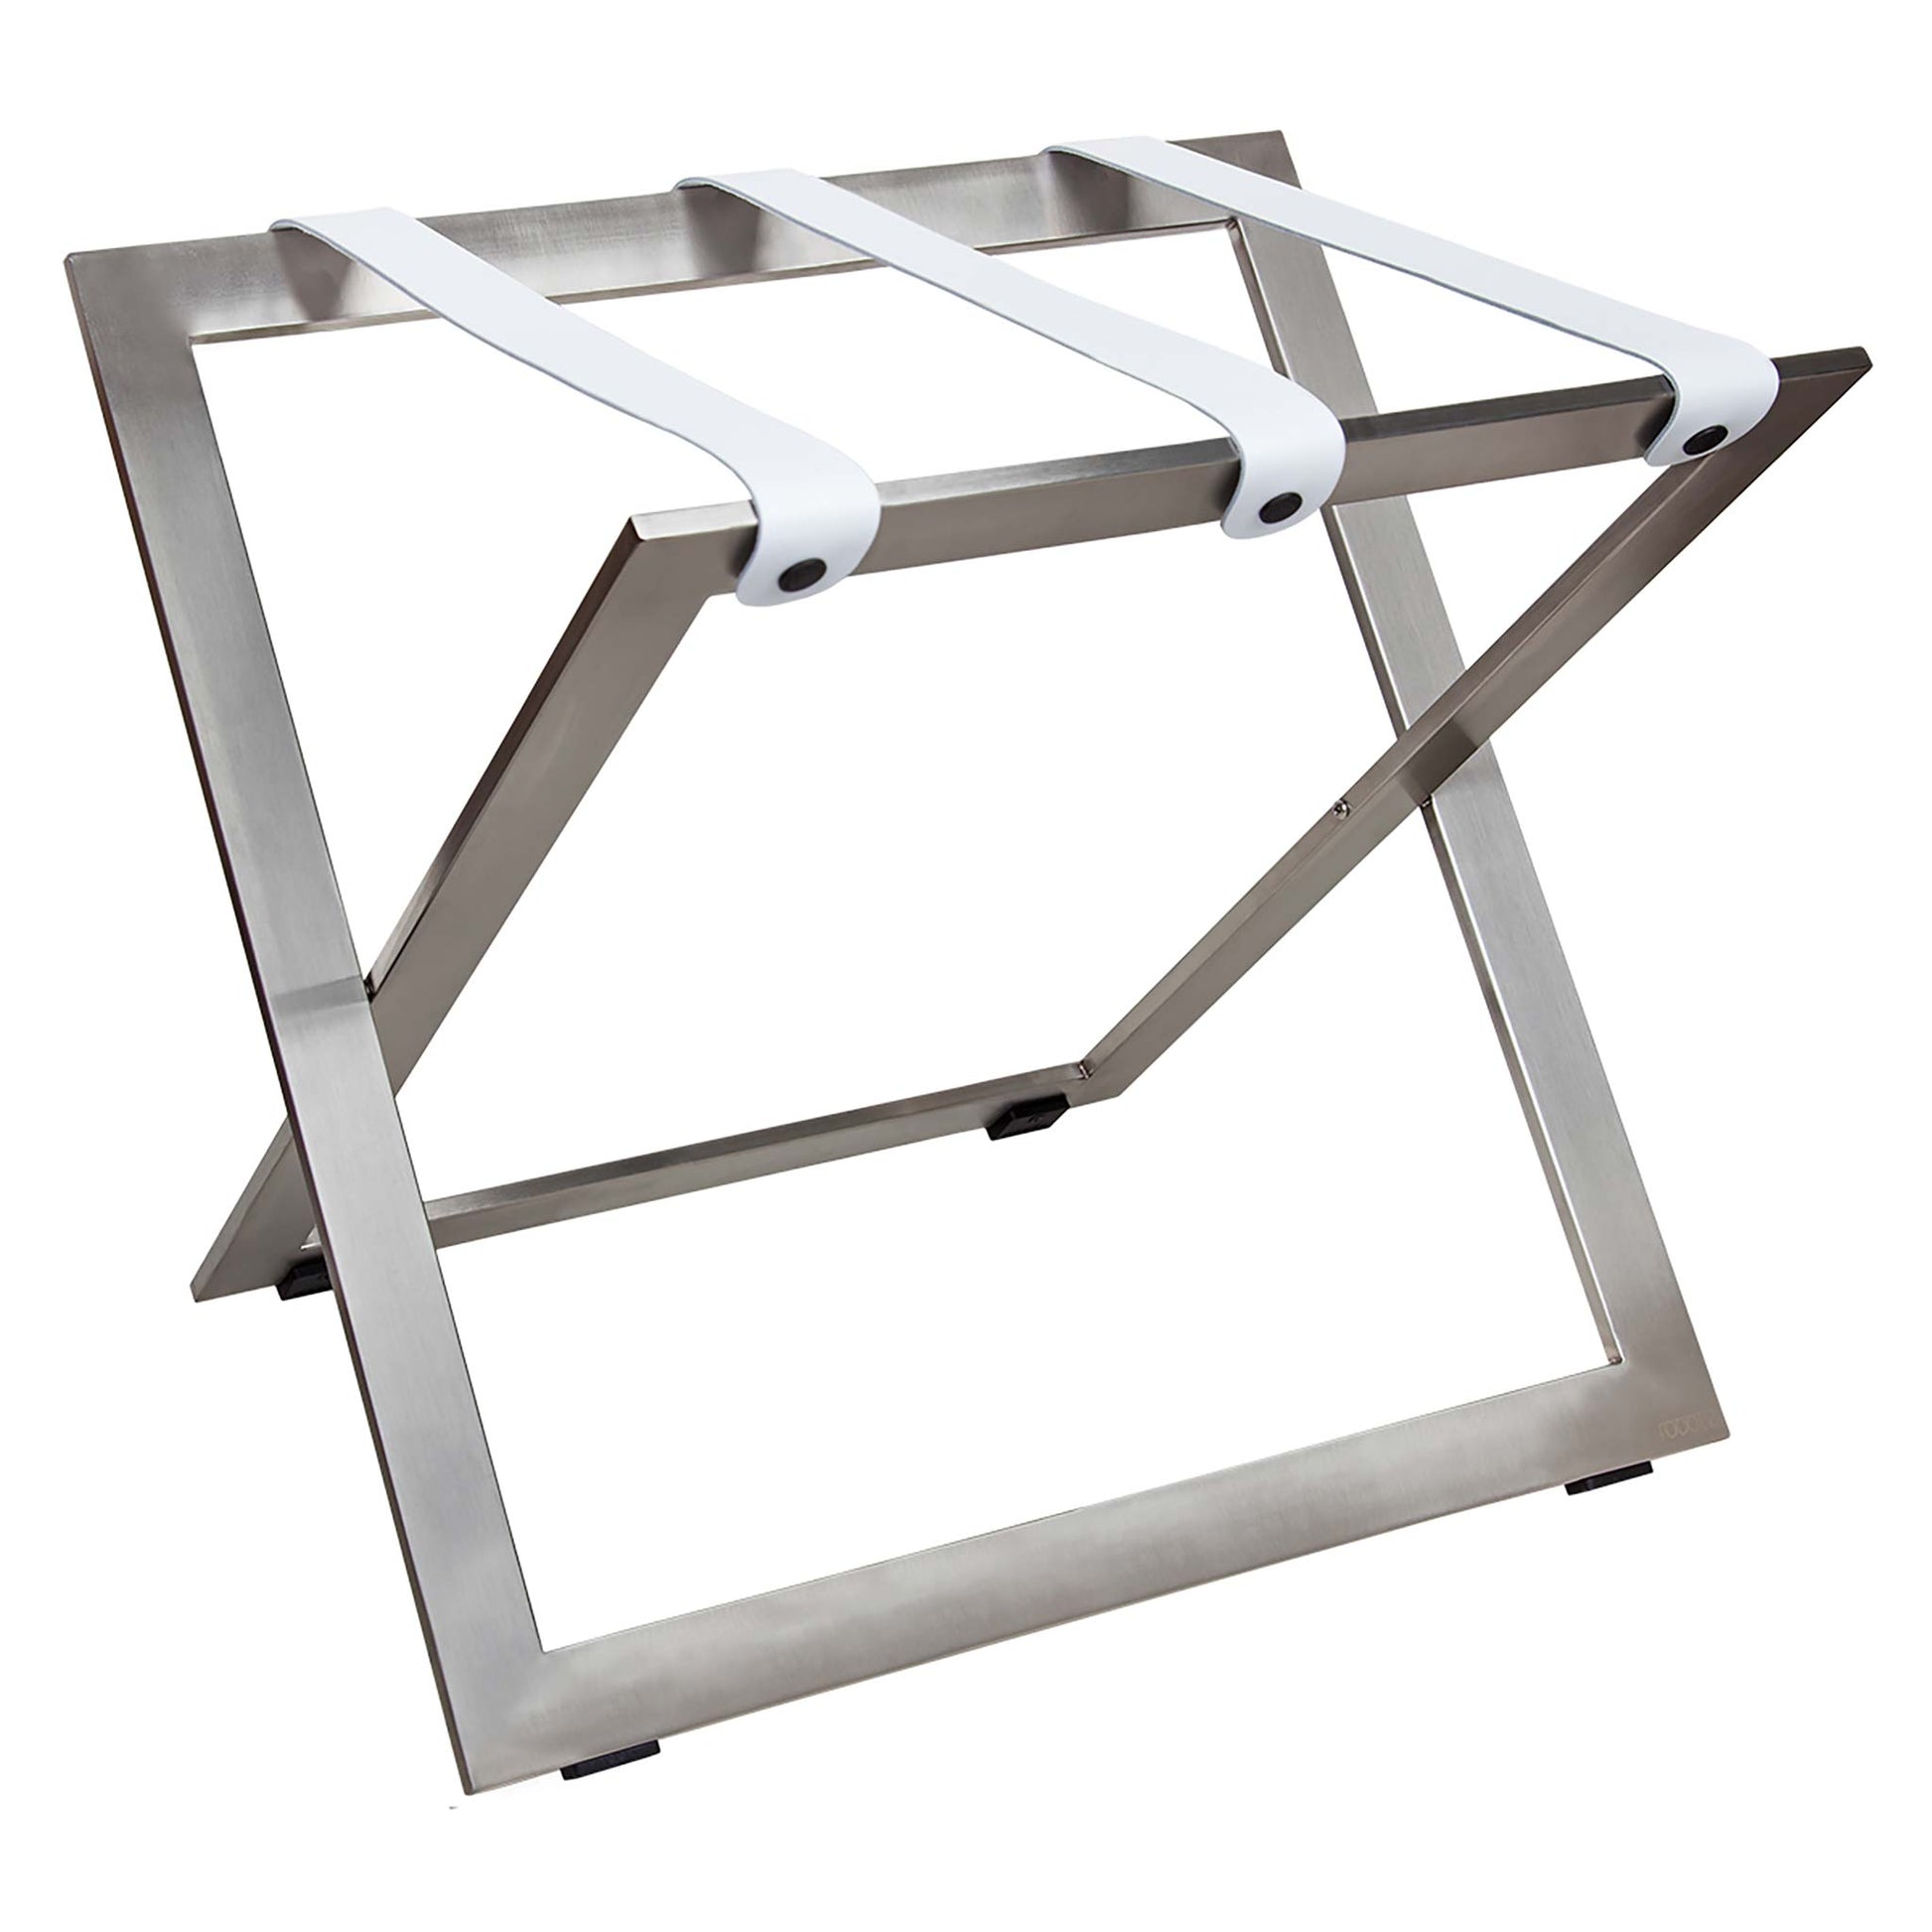 Roootz stainless steel compact hotel luggage rack with white leather straps